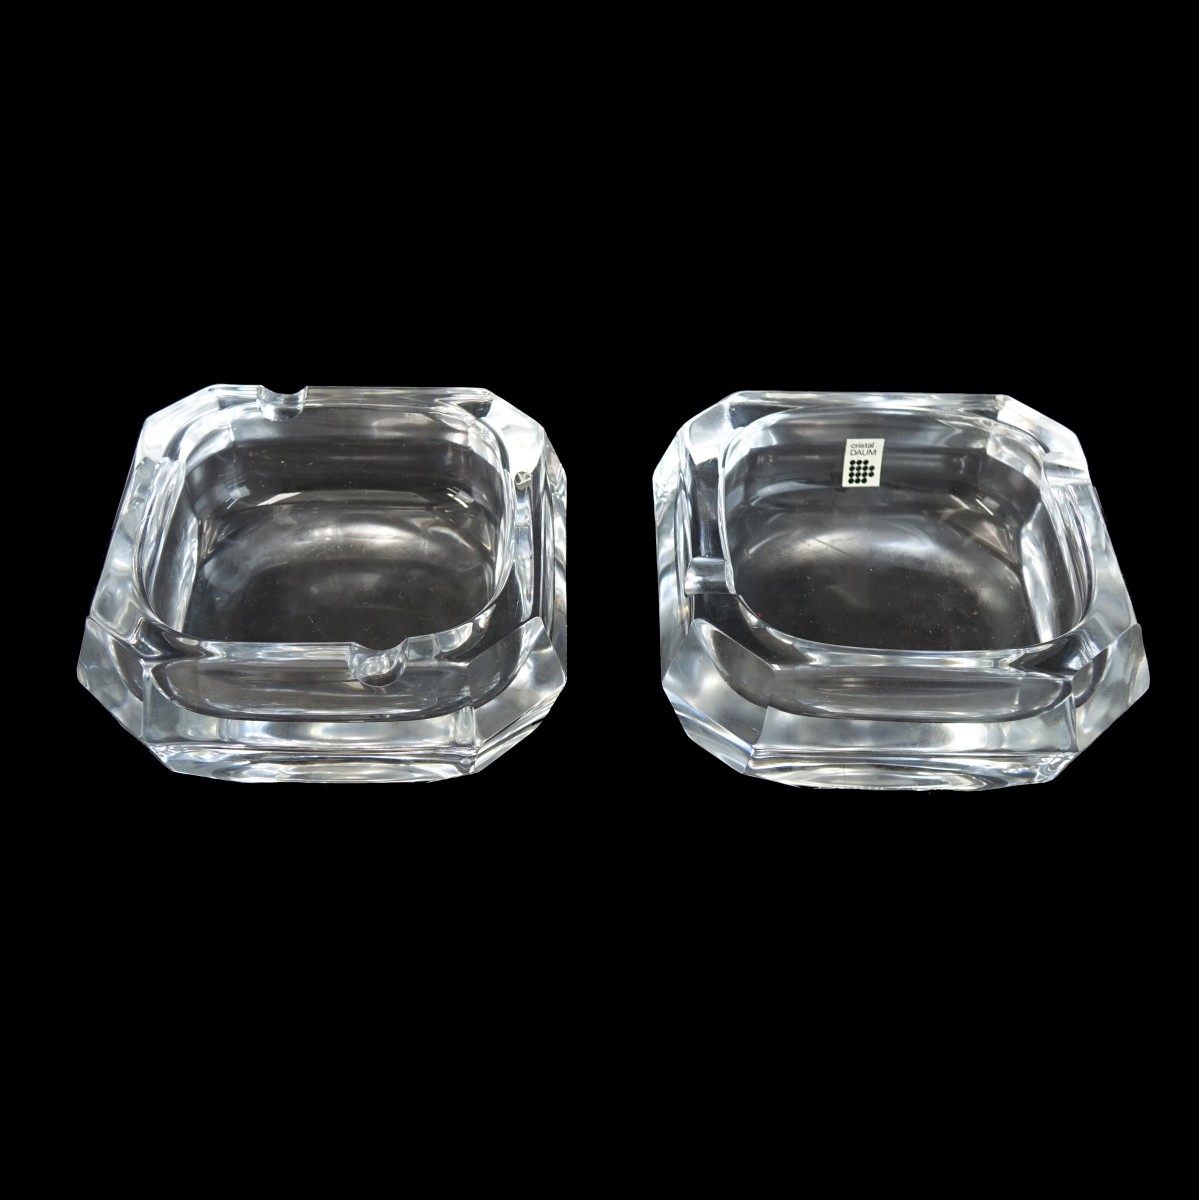 Pair of Daum Crystal Ashtrays in Boxes